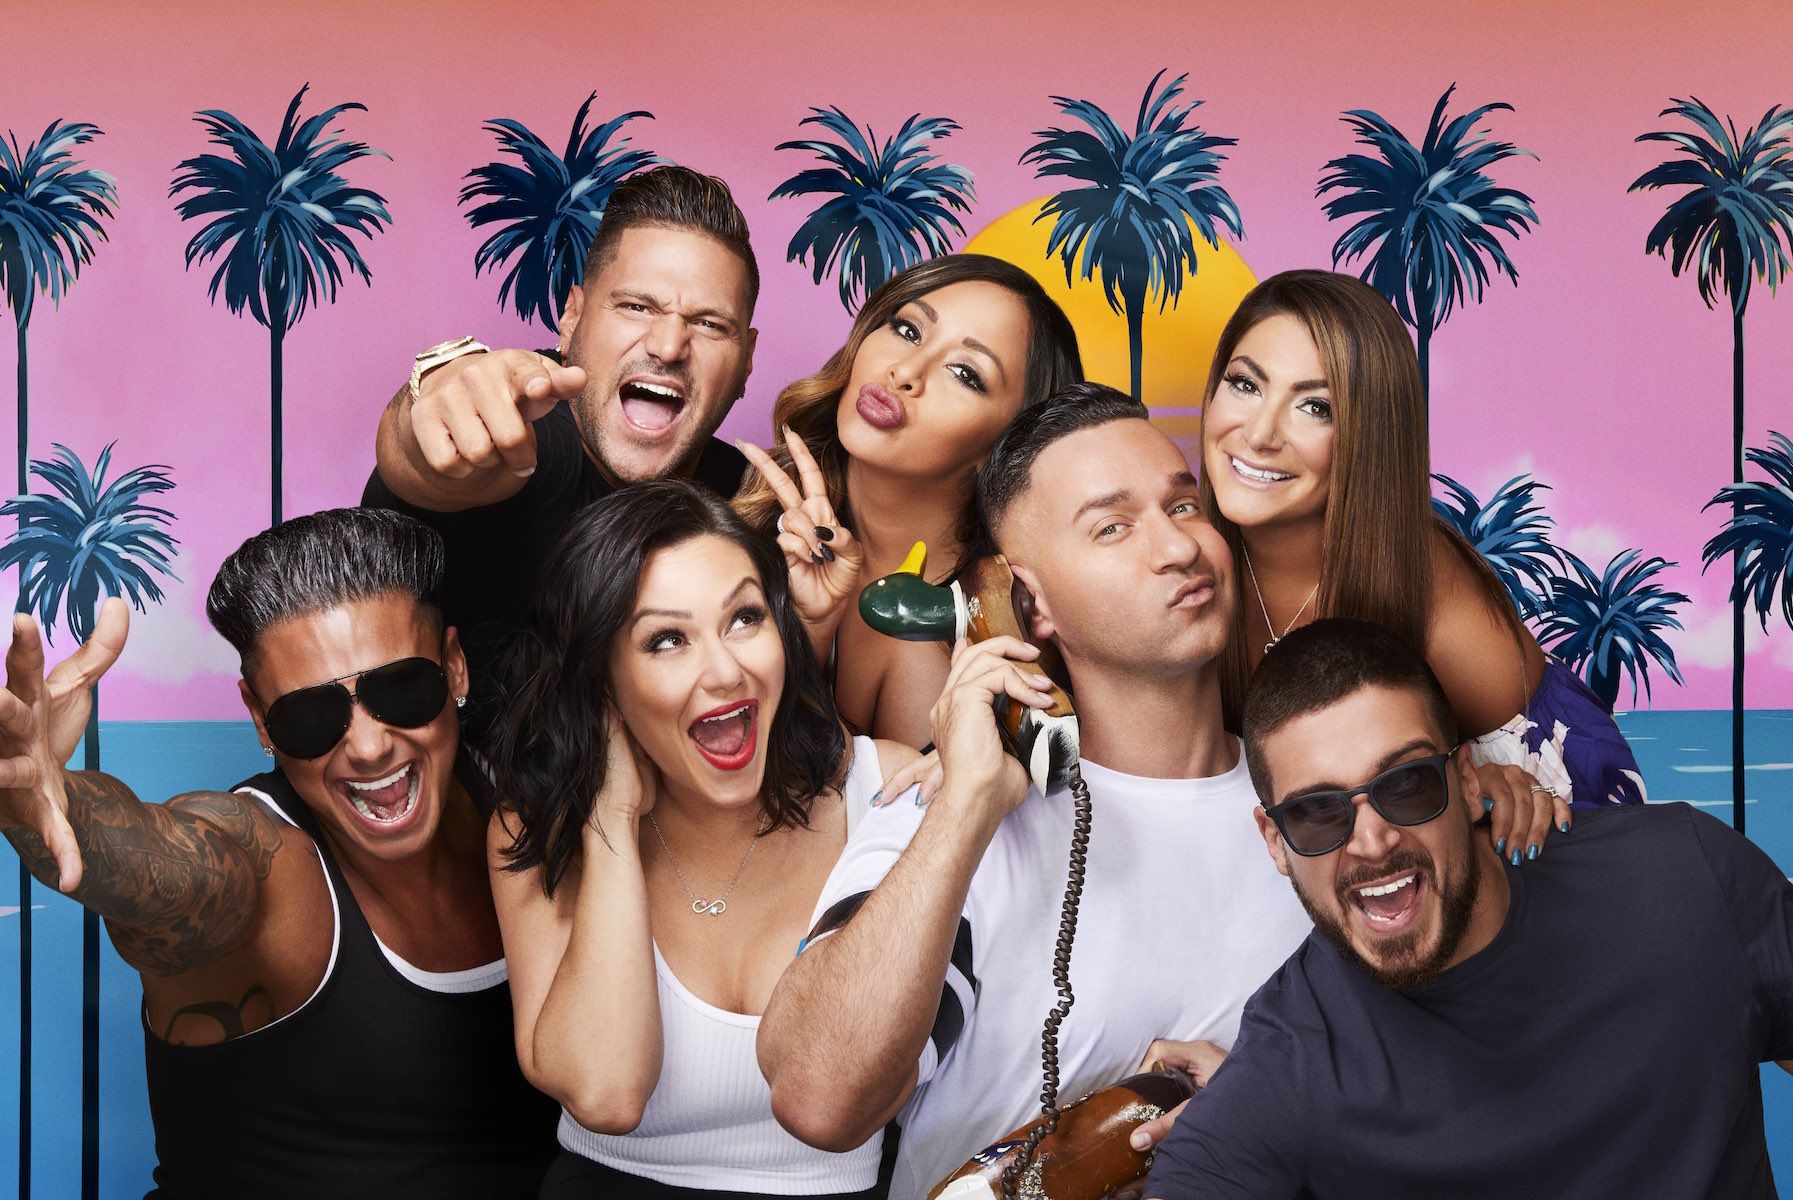 Here's the 'Jersey Shore' cast ranked by net worth